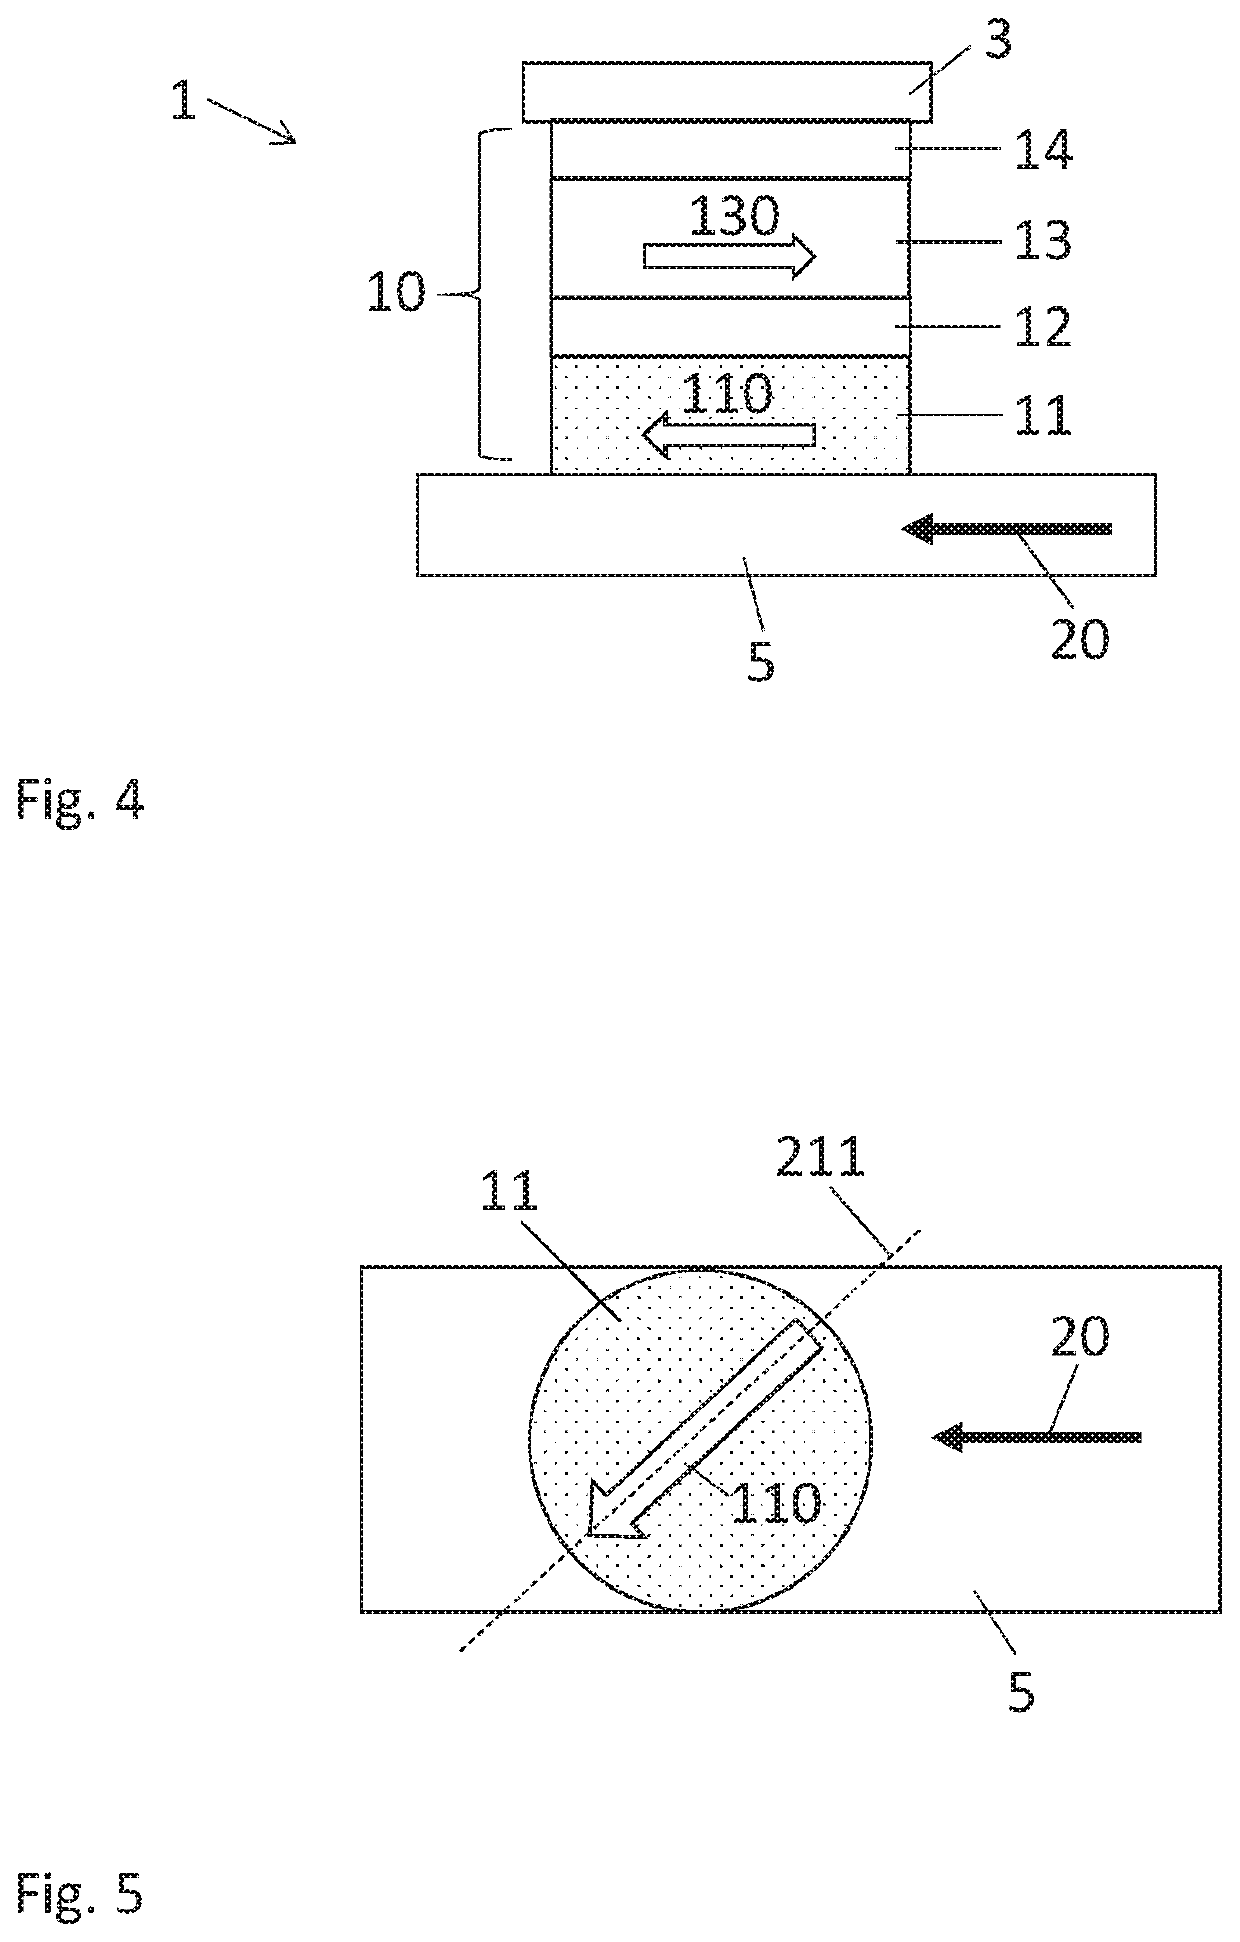 Magnetic memory cell having deterministic switching and high data retention